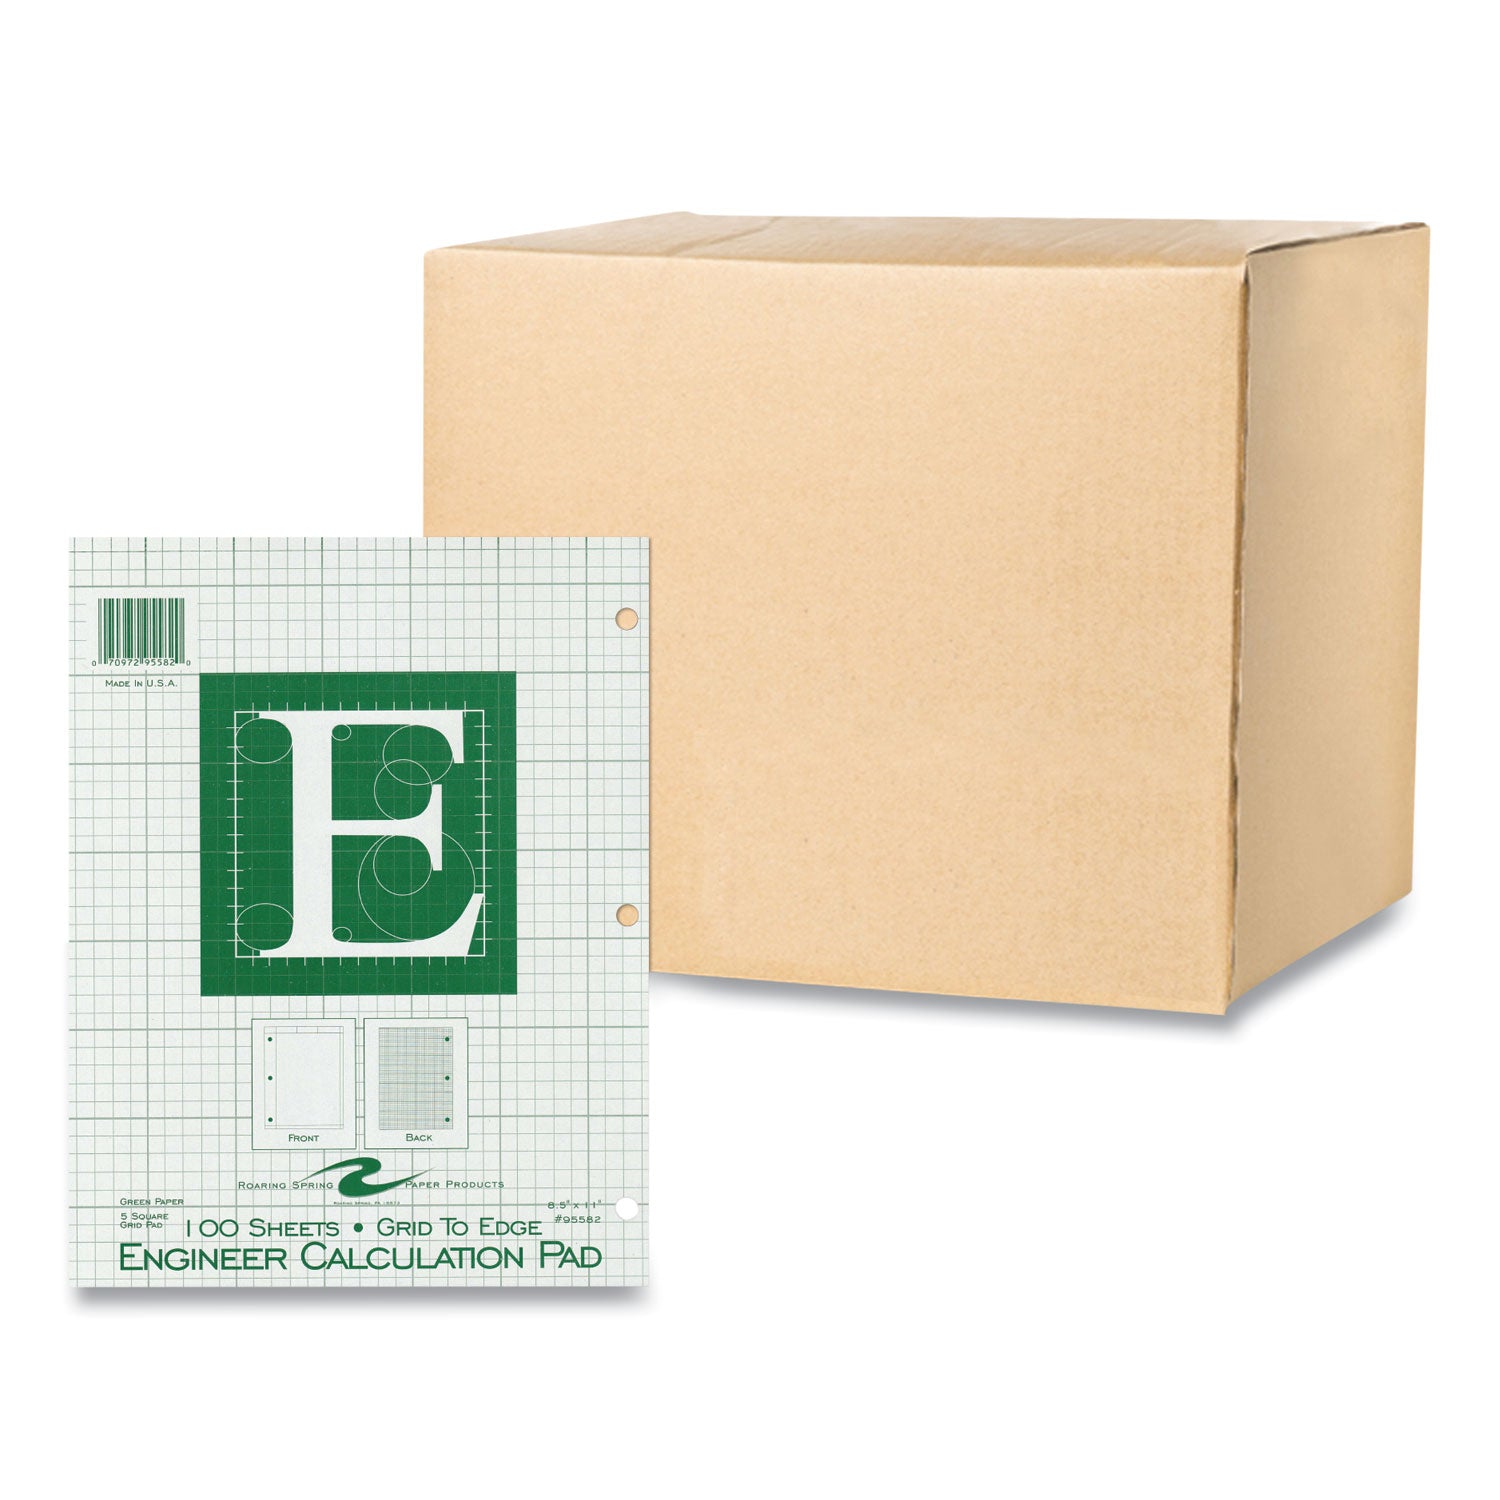 engineer-pad-125-margin-quad-rule-5-sq-in-1-sq-in-100-lt-green-85x11-sheets-pad-24-ct-ships-in-4-6-business-days_roa95582cs - 3